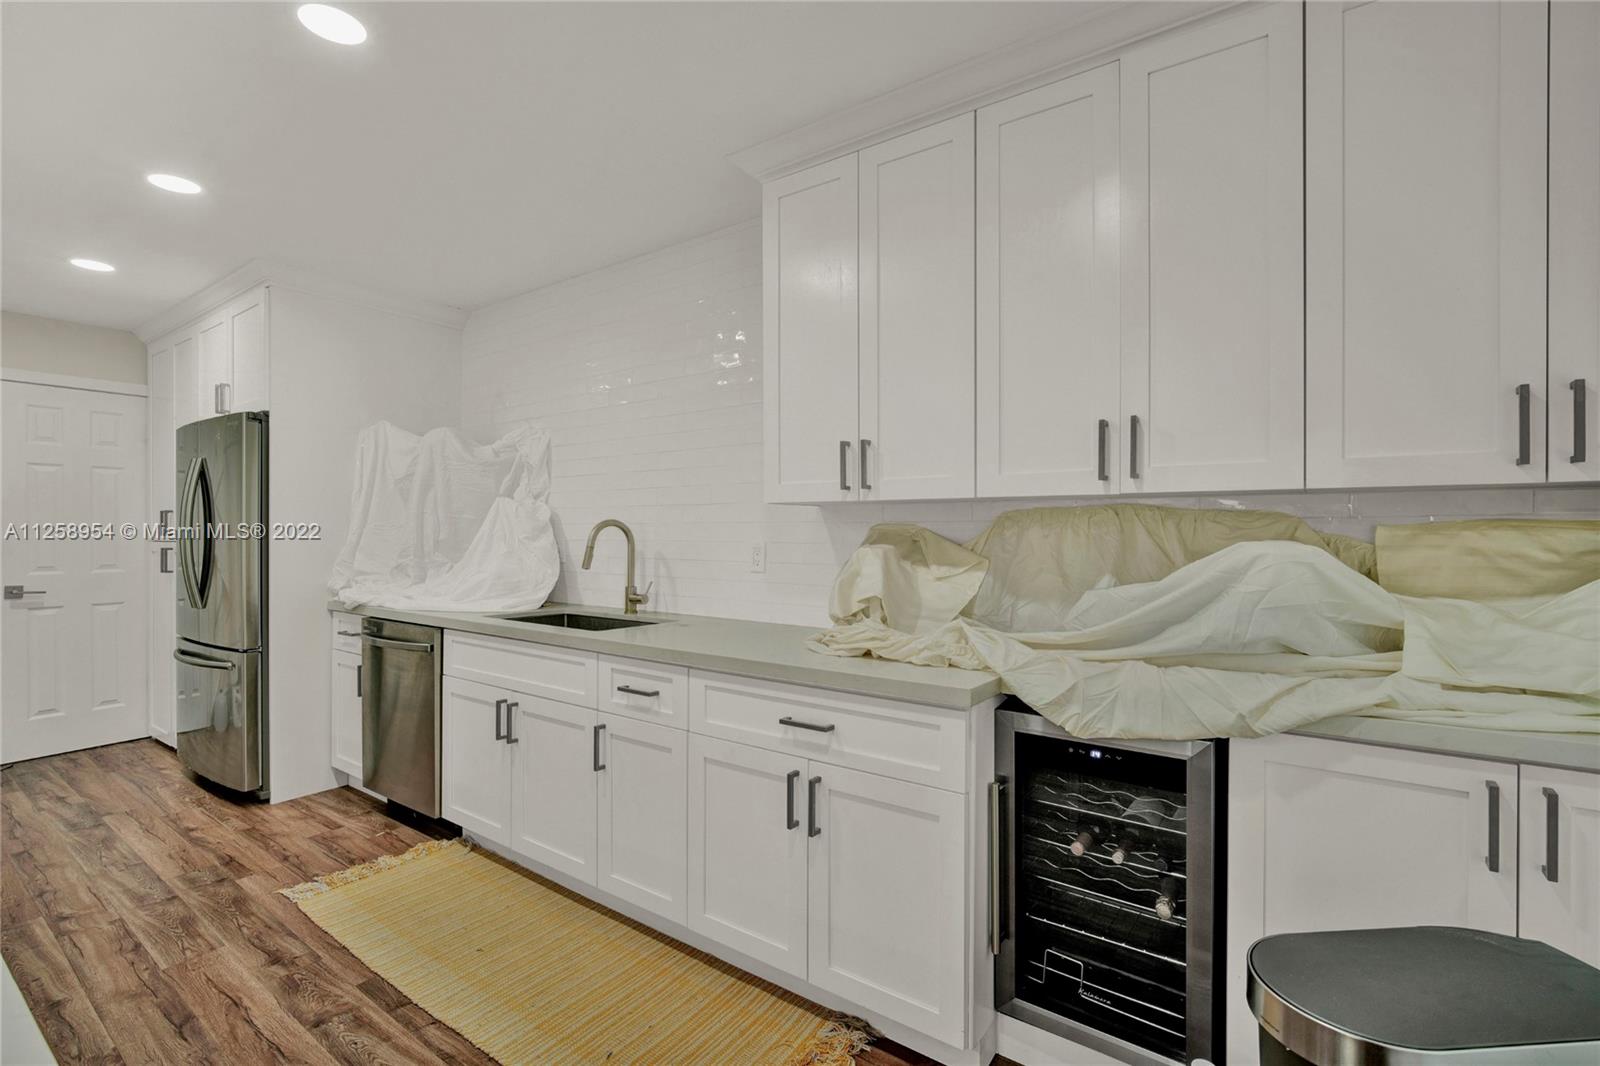 Dreamy completely remodeled in 2020 featuring 2 bedrooms with 1 bathroom upstairs and a half bathroom downstairs for guests. Kitchen offers stainless steel appliances (refrigerator, stove/oven, microwave, dishwasher, and temperature controlled wine storage), with bright white shaker cabinets and glossy white subway tile. Bathroom upstairs has bathtub with herringbone pattern tile installation for an upscale look. Property has impact windows and doors, a walled off private patio, and volume ceilings and lots of light in the bedrooms. You do not want to miss this property! Tenant occupied, DO NOT disturb tenant without a confirmed appointment.